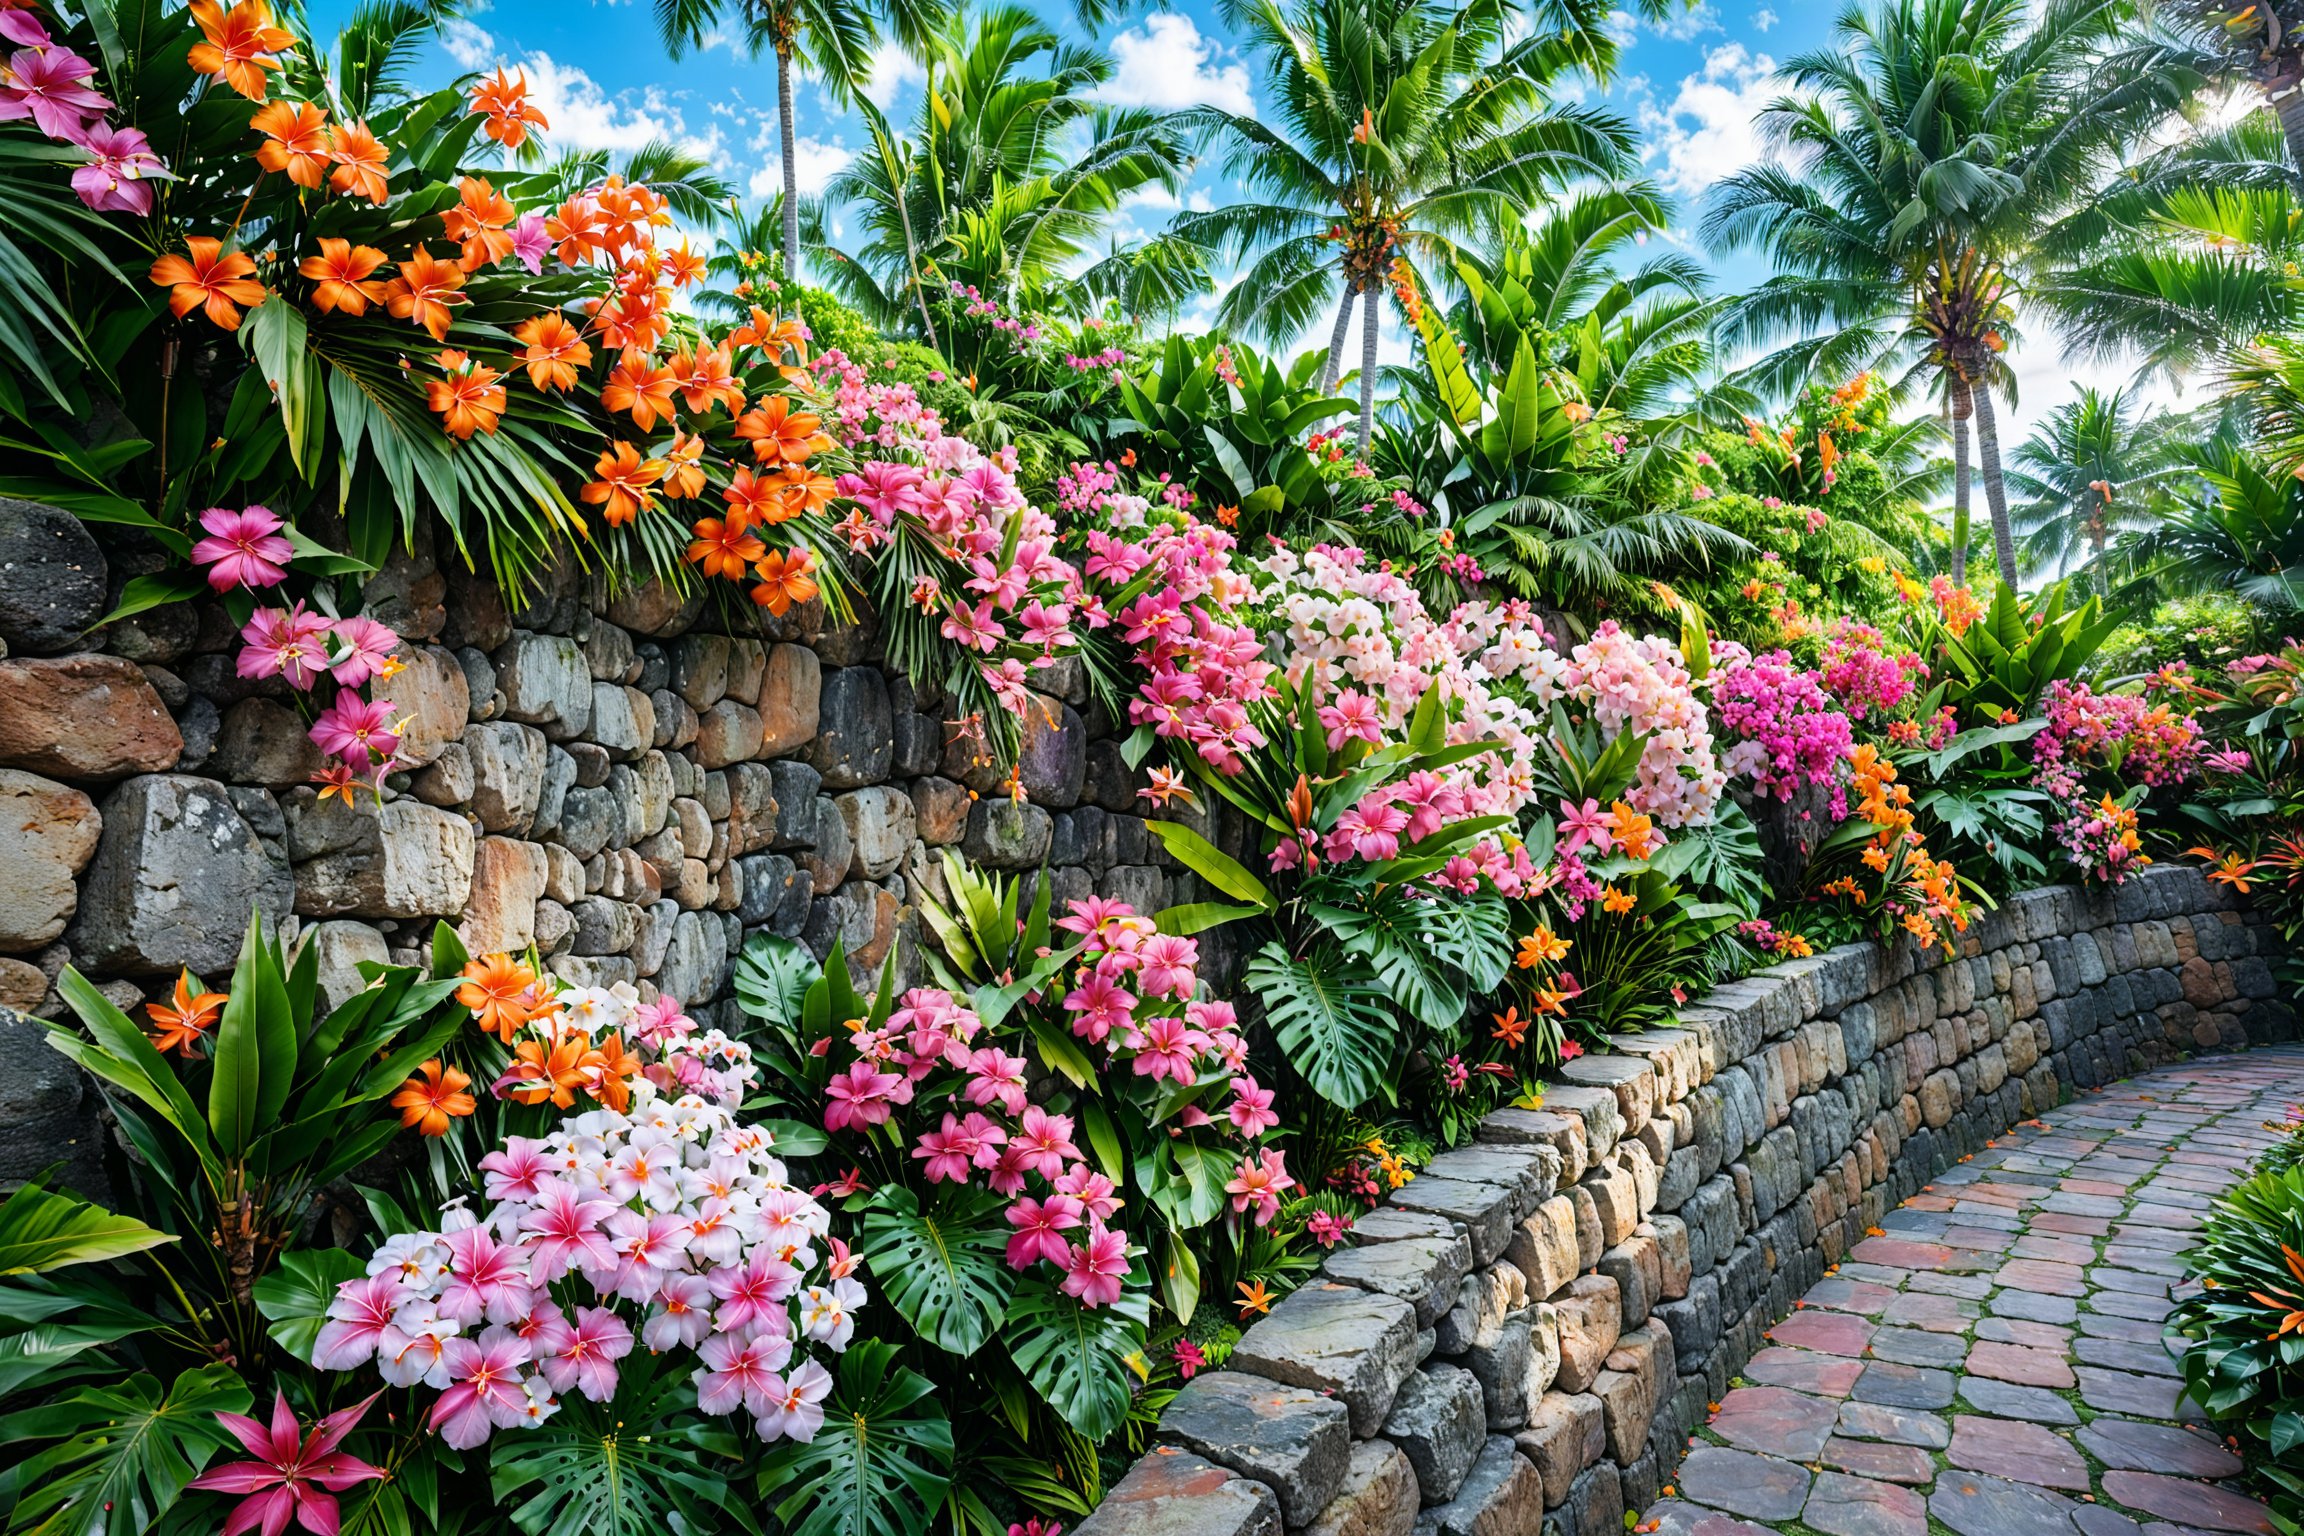 A vibrant tropical setting with a stone wall as the backdrop. The wall is adorned with a myriad of colorful flowers, ranging from pink to orange, with some even hanging down. Above the wall, tall palm trees sway gently, their fronds displaying a lush green hue. The sky is clear, suggesting a bright and sunny day. The entire scene exudes a sense of tranquility and natural beauty.